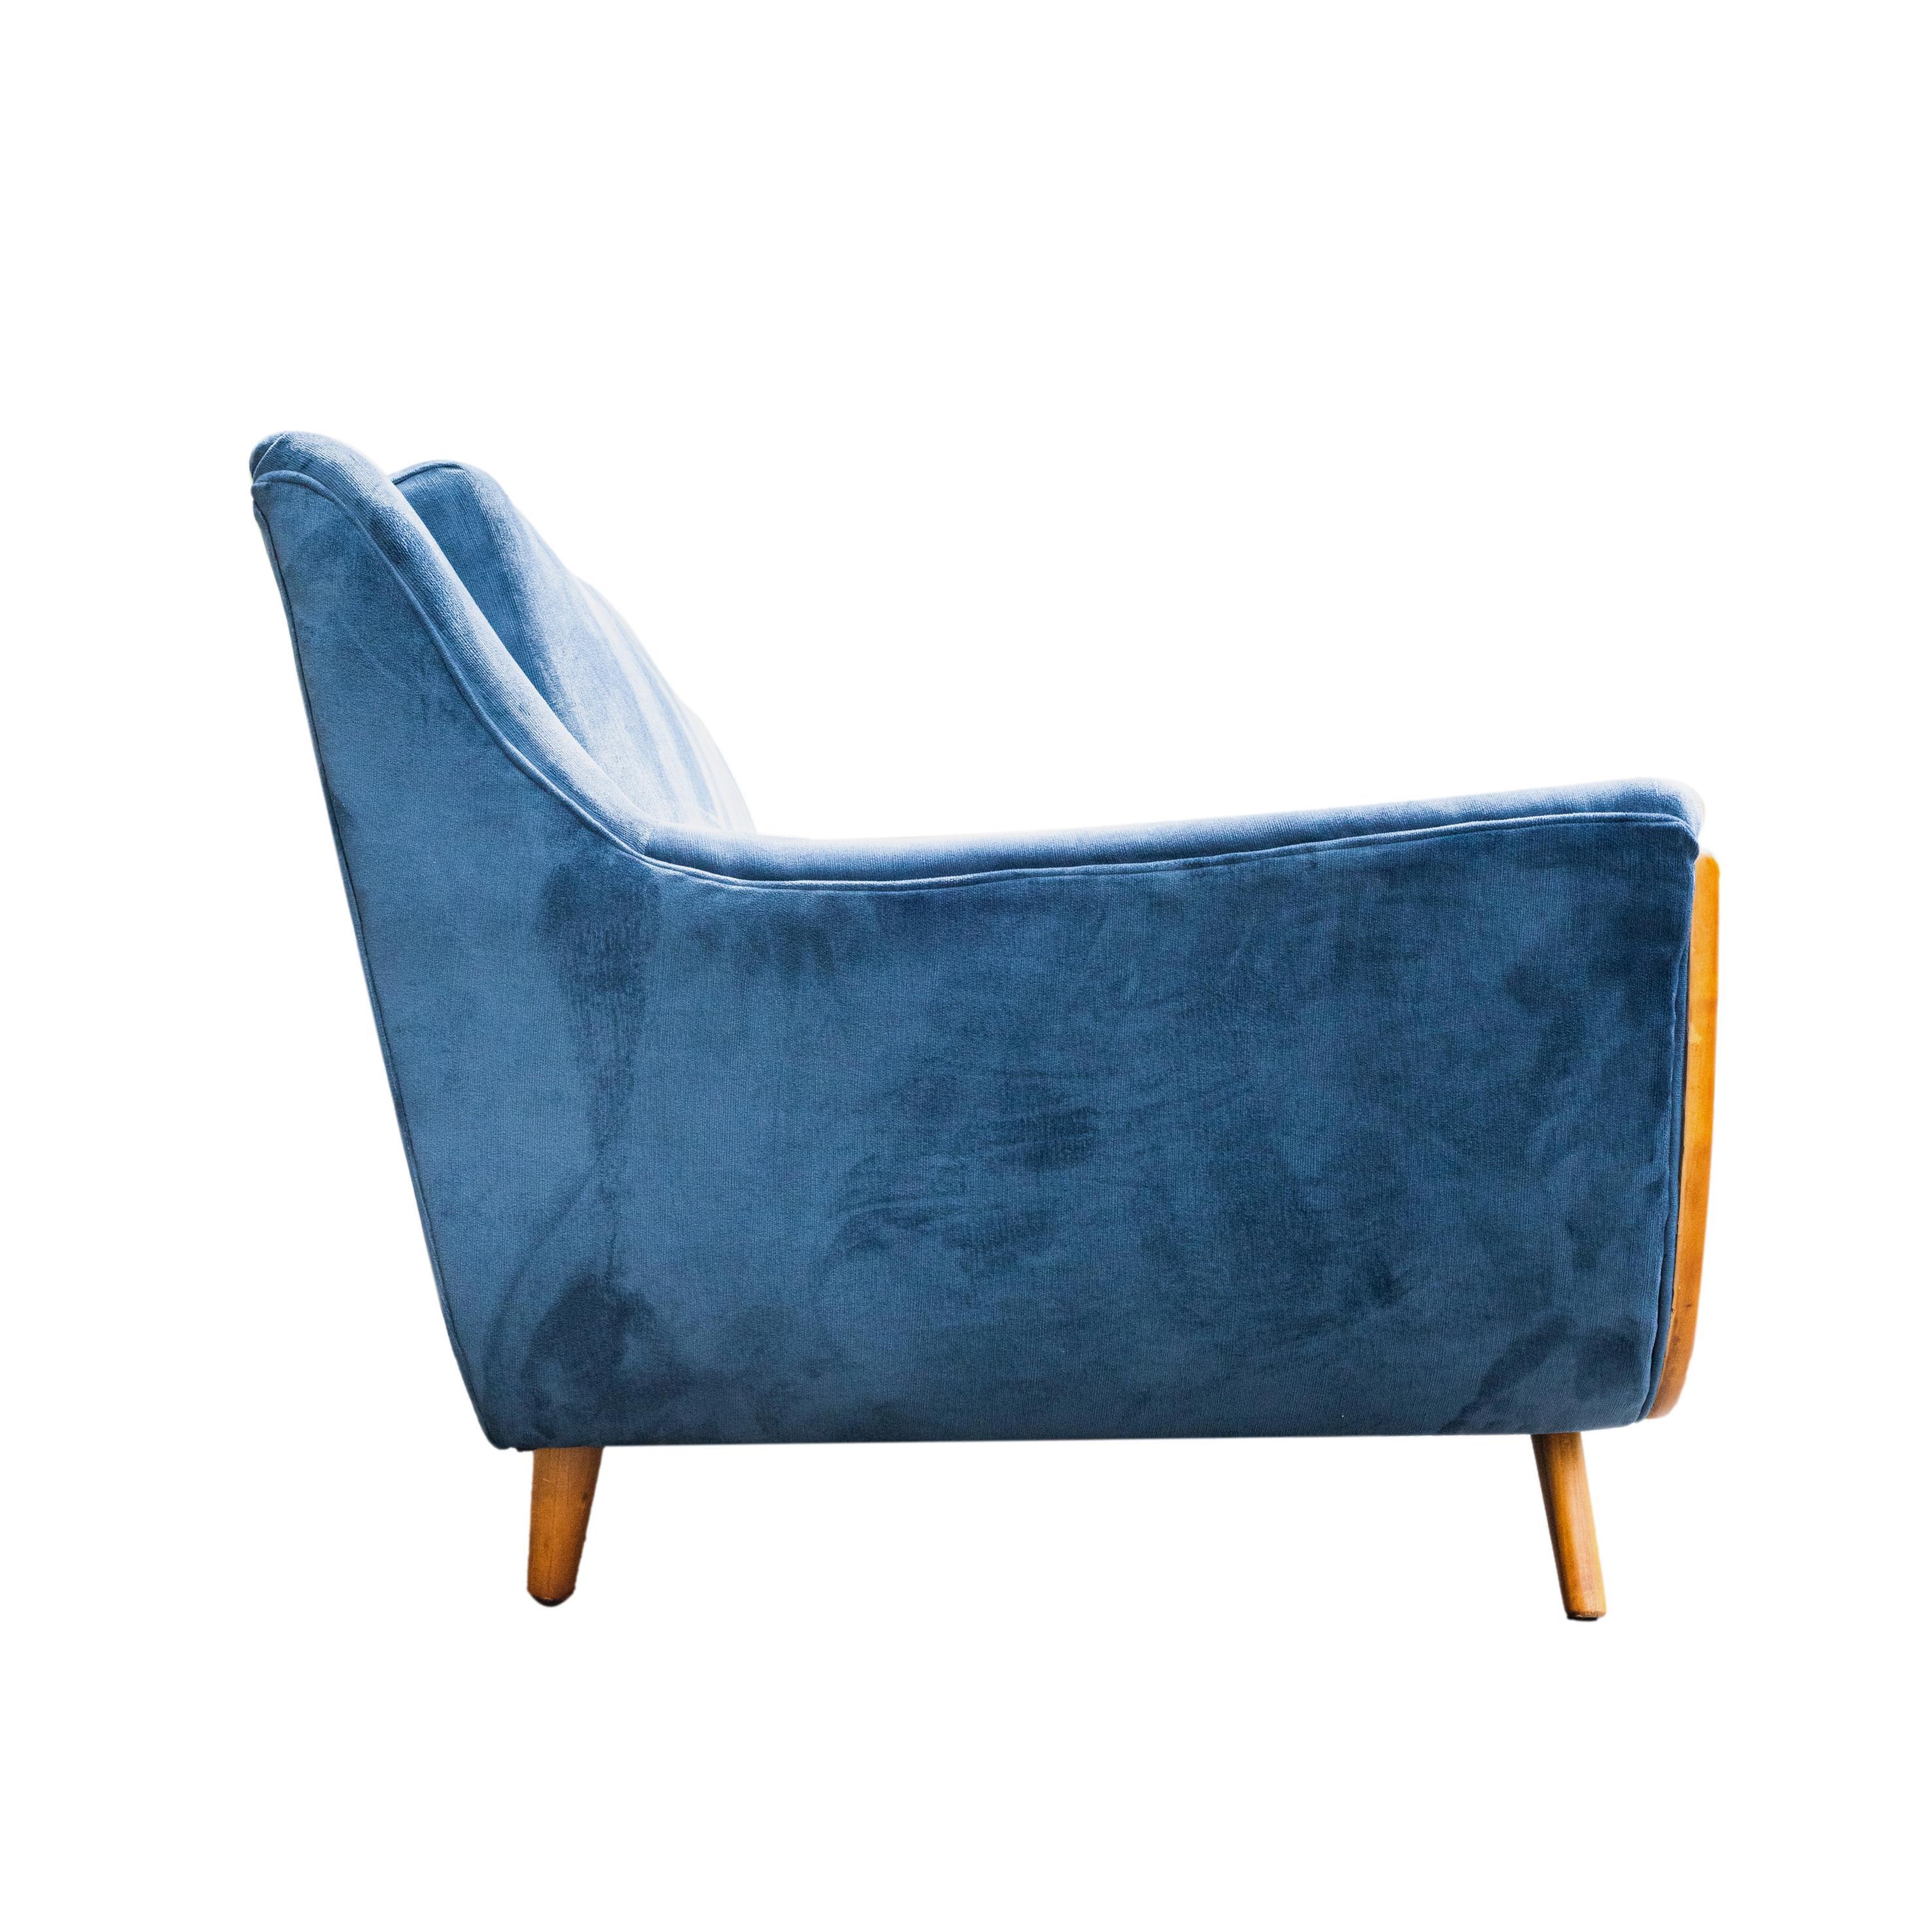 American Adrian Pearsall-Style Sofa Newly Reupholstered in Blue Velvet, ca. 1960